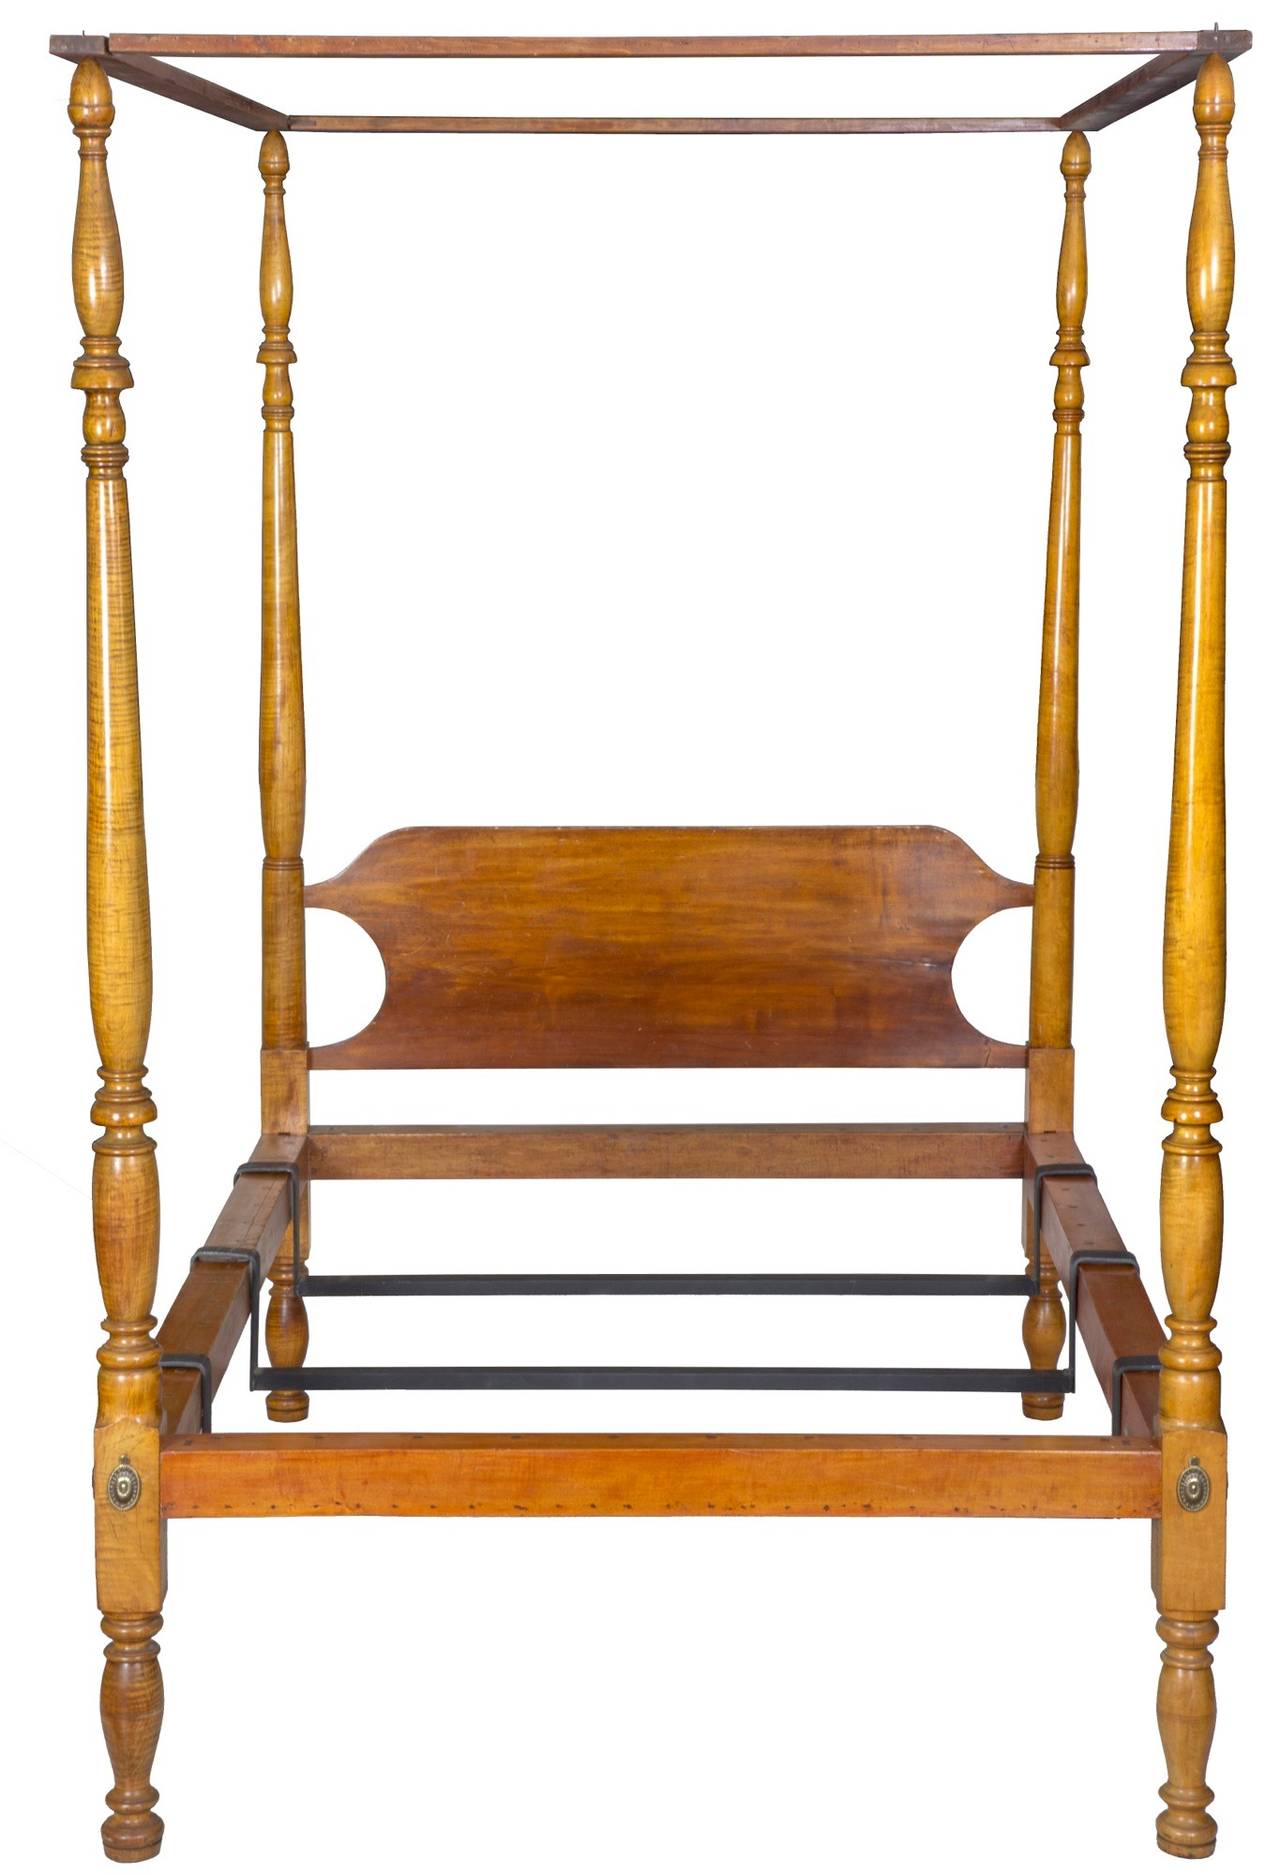 American Federal Tiger Maple Bed, New England, circa 1820